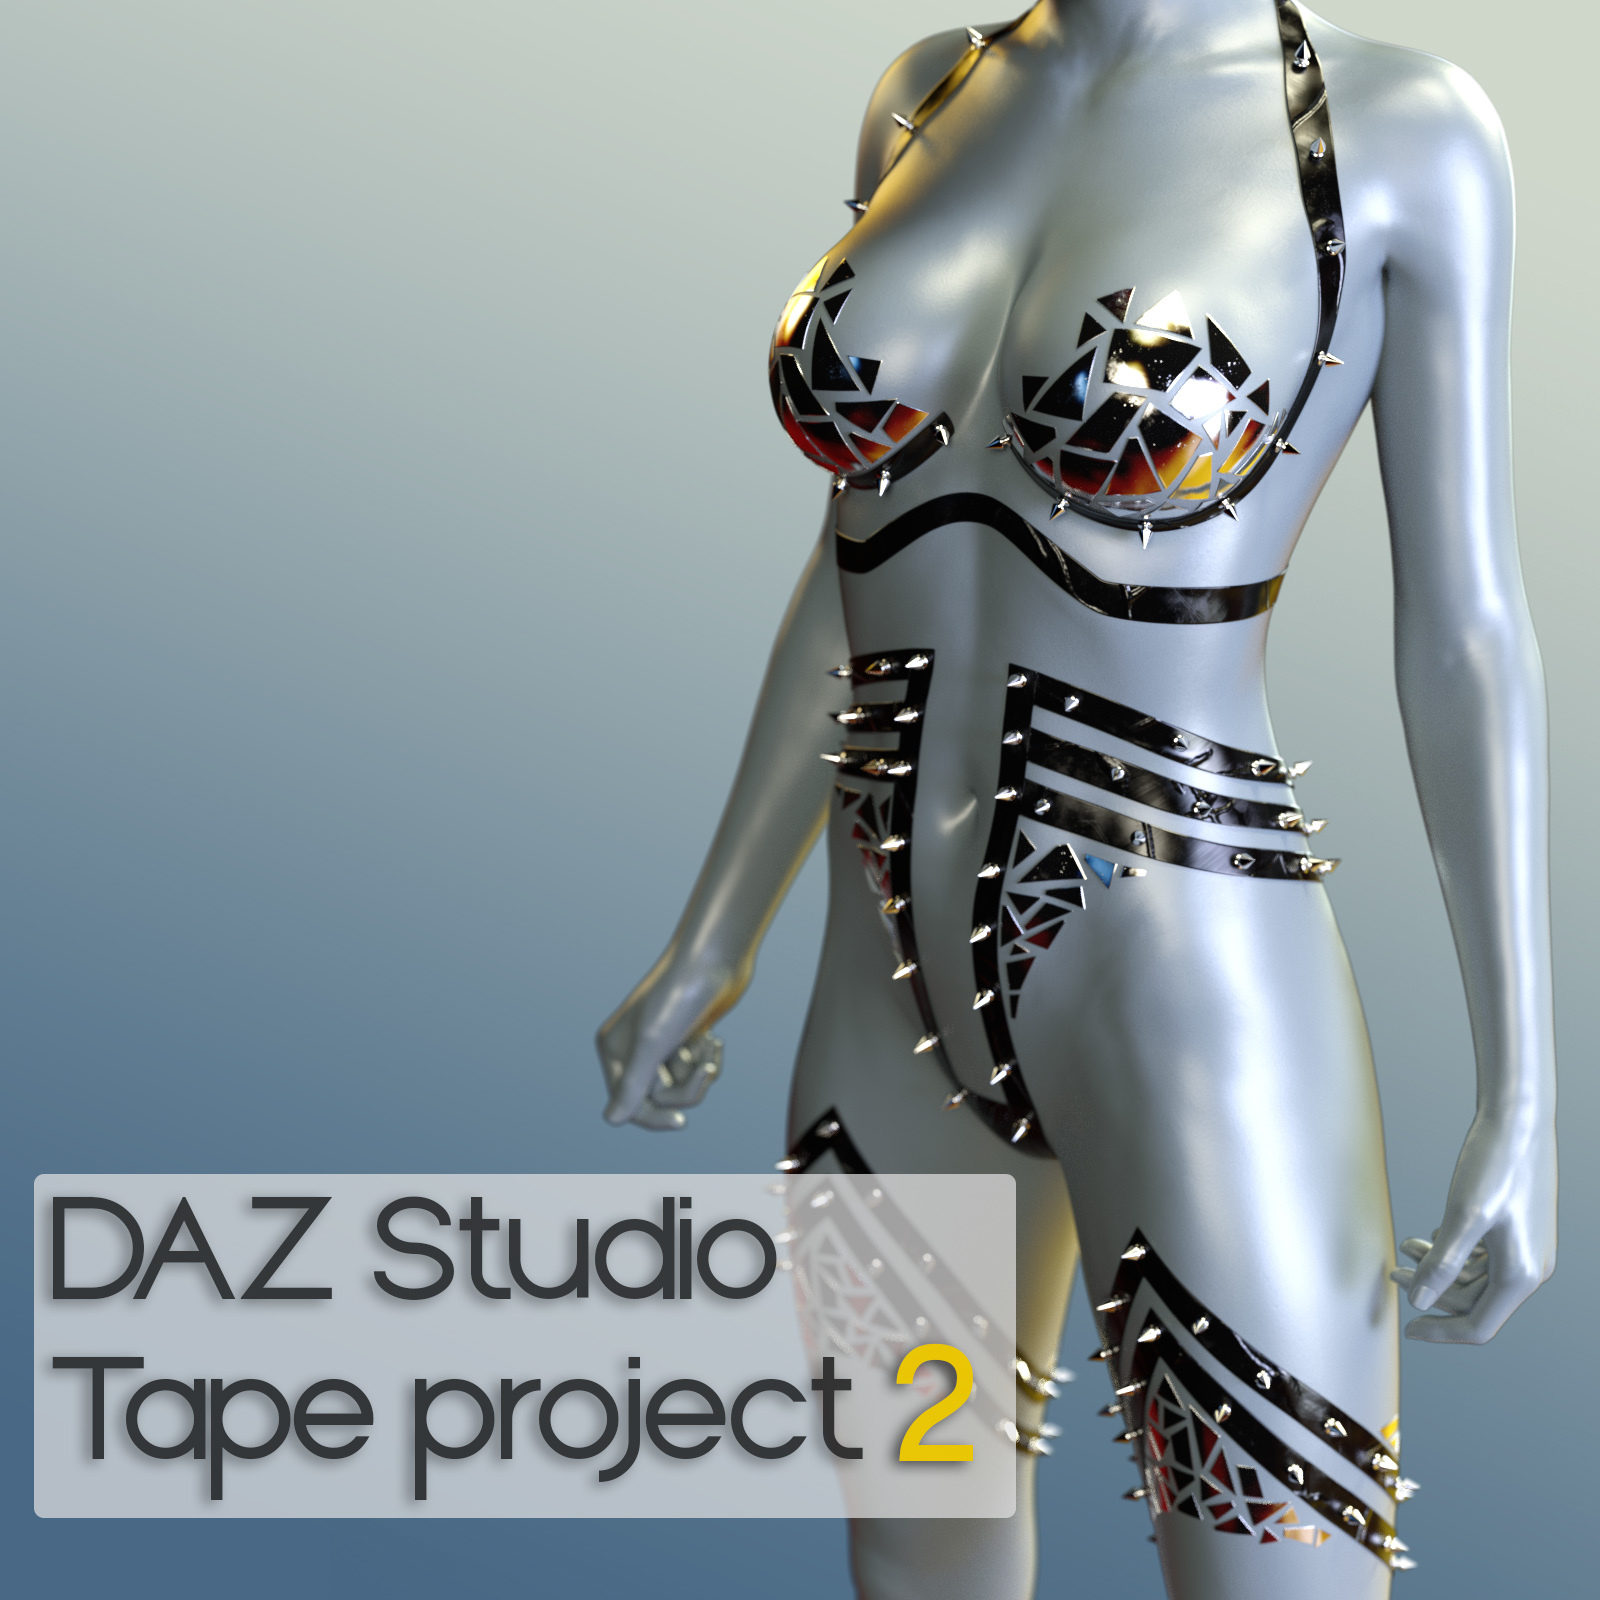 Daz Studio Tape Project 2 for Genesis 8 and 3 Females by: devianttuna13, 3D Models by Daz 3D